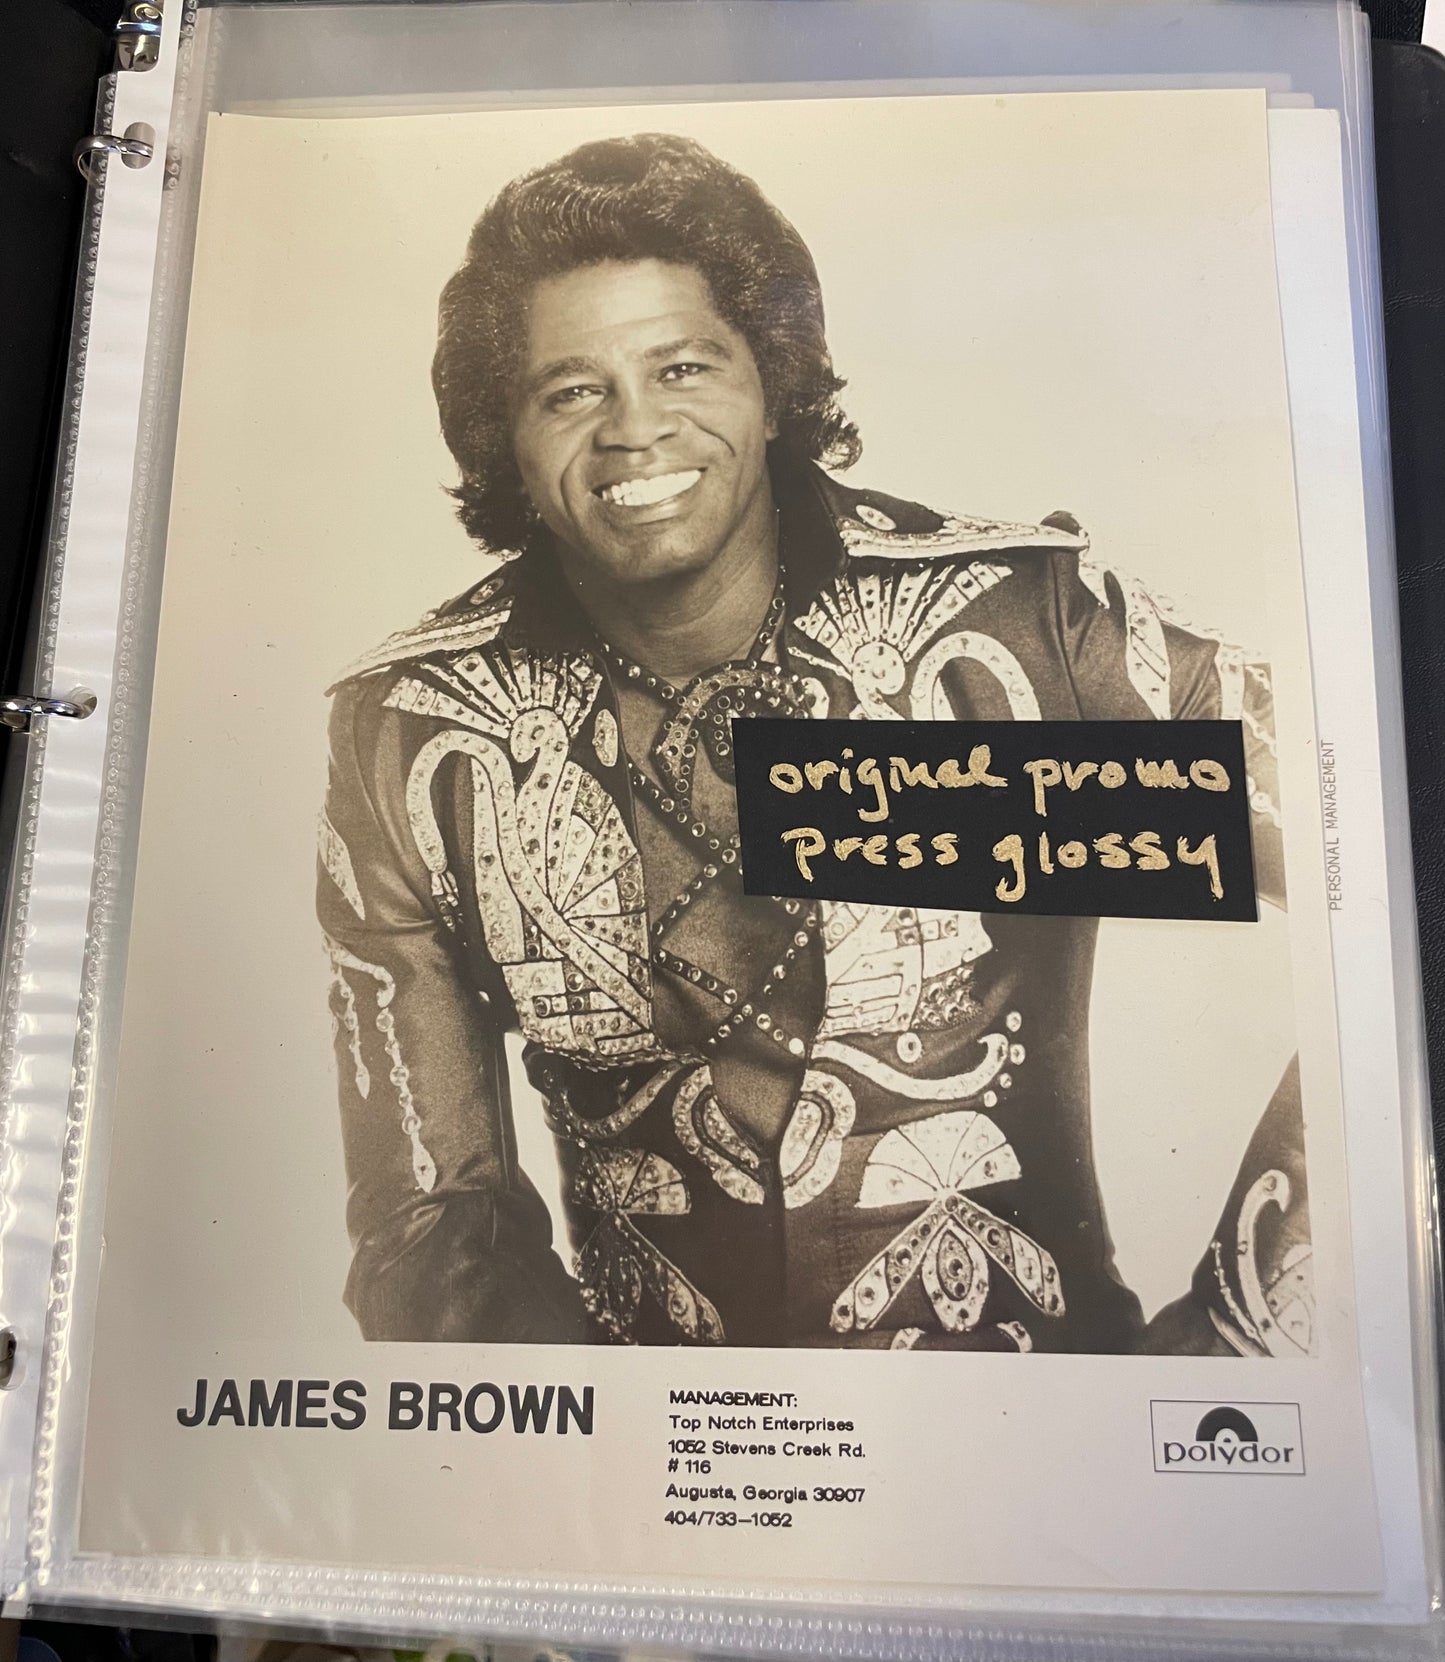 James Brown - Original Special Promo from the 80s